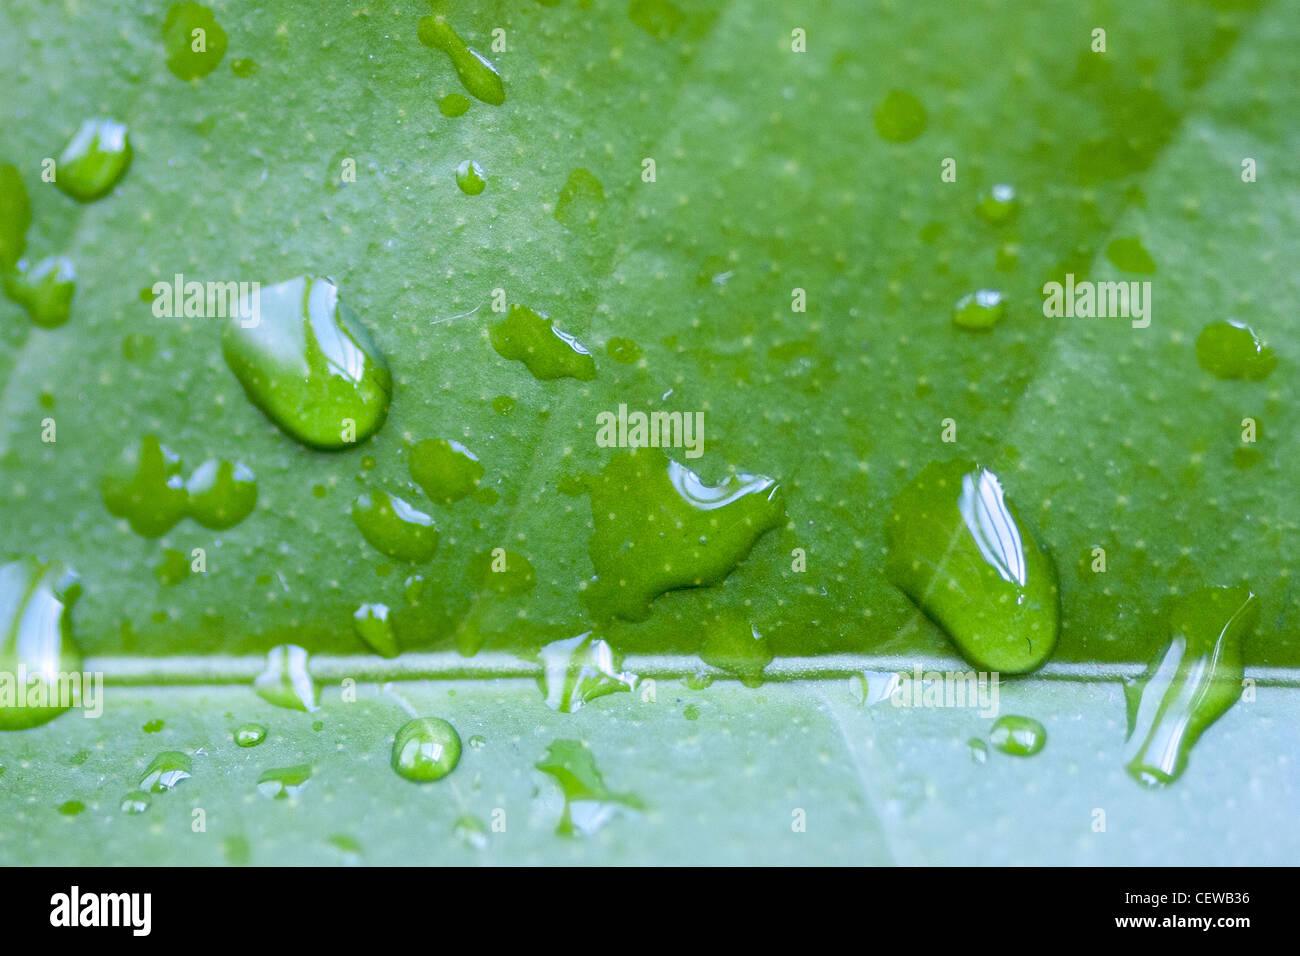 Fresh leaf with water drops Stock Photo